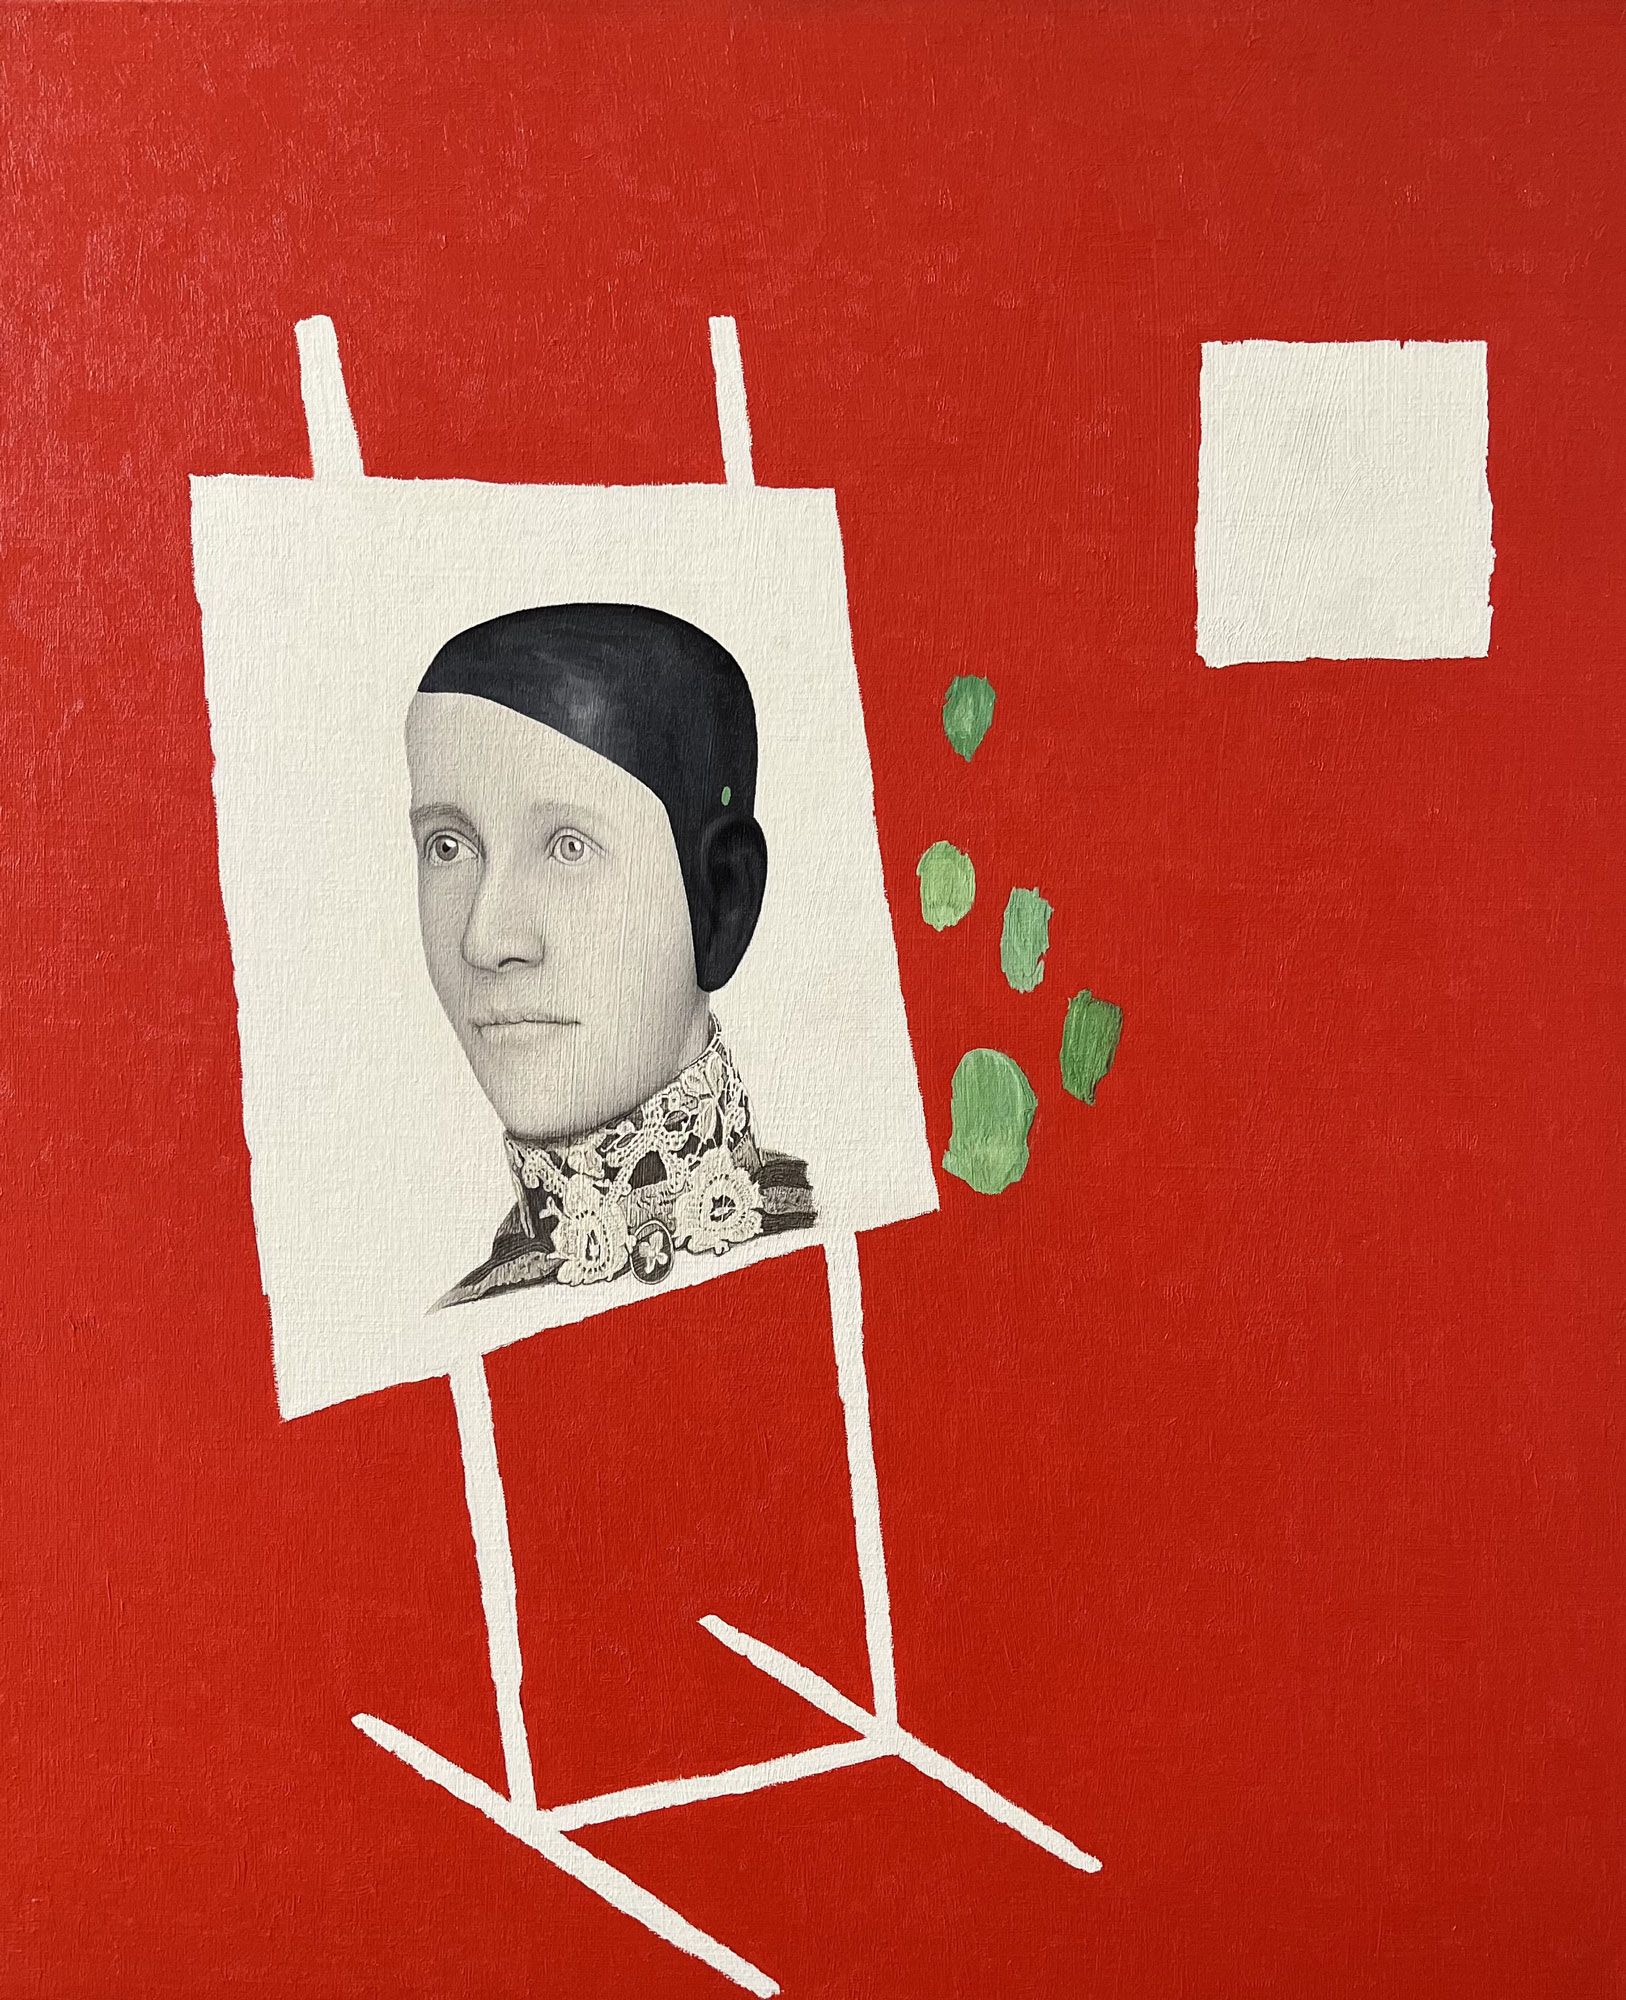 Mark Alexander's oil on canvas artwork (72 x 58 cm, 2017) showcases a monochrome portrait on an easel set against a vivid red background, interspersed with abstract green and white elements.